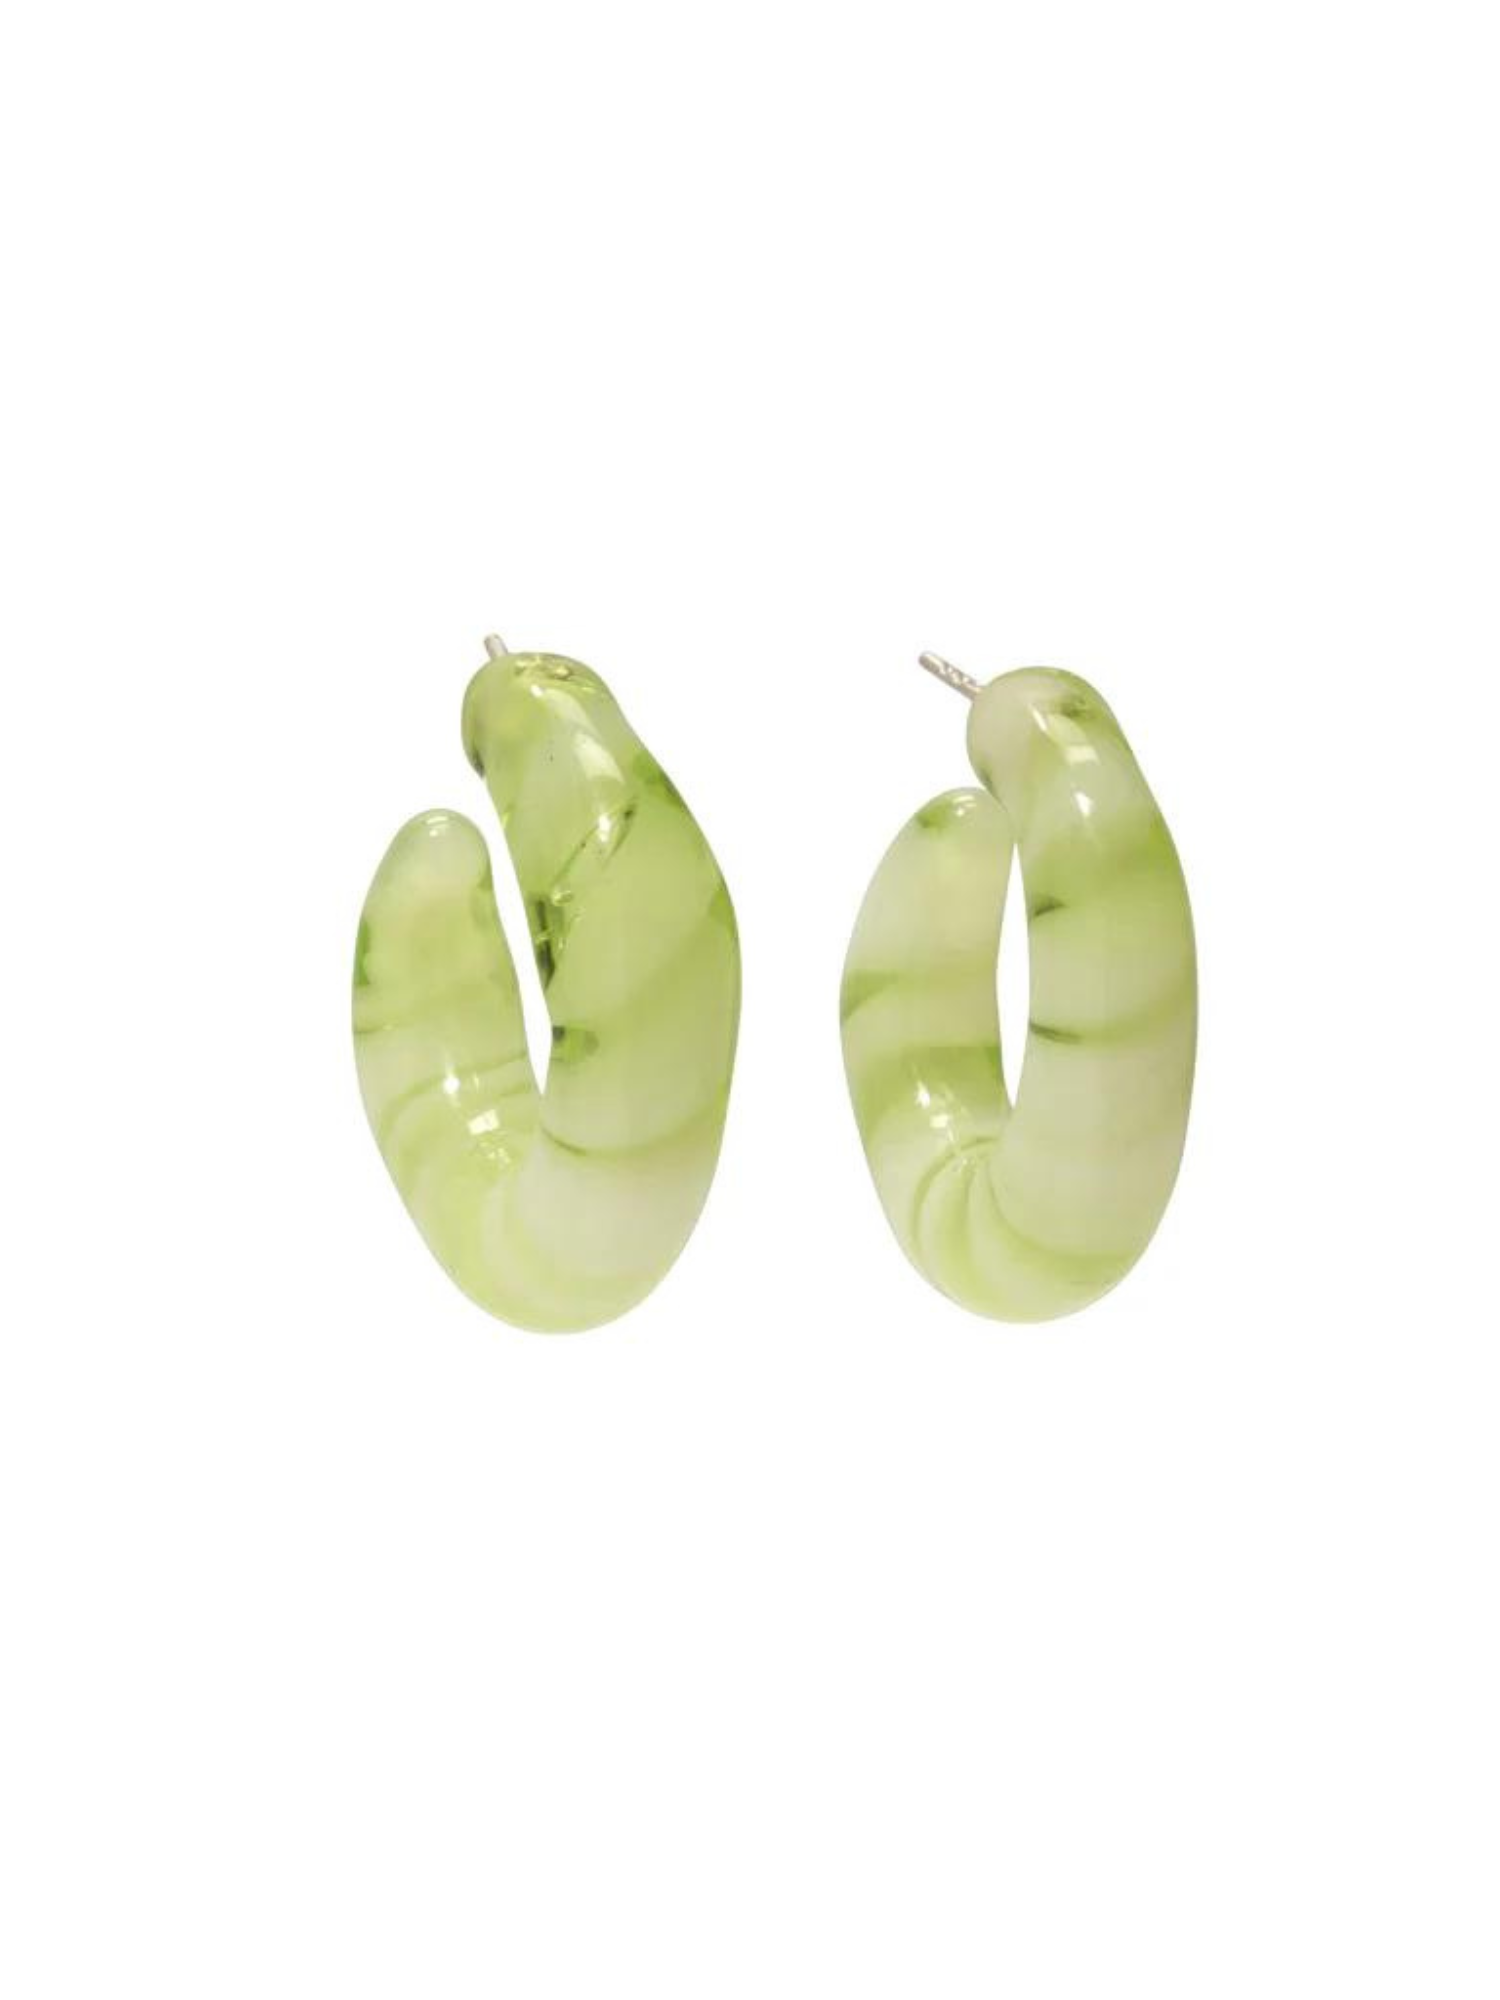 Lizzie Fortunato Cascais Hoops in Lime